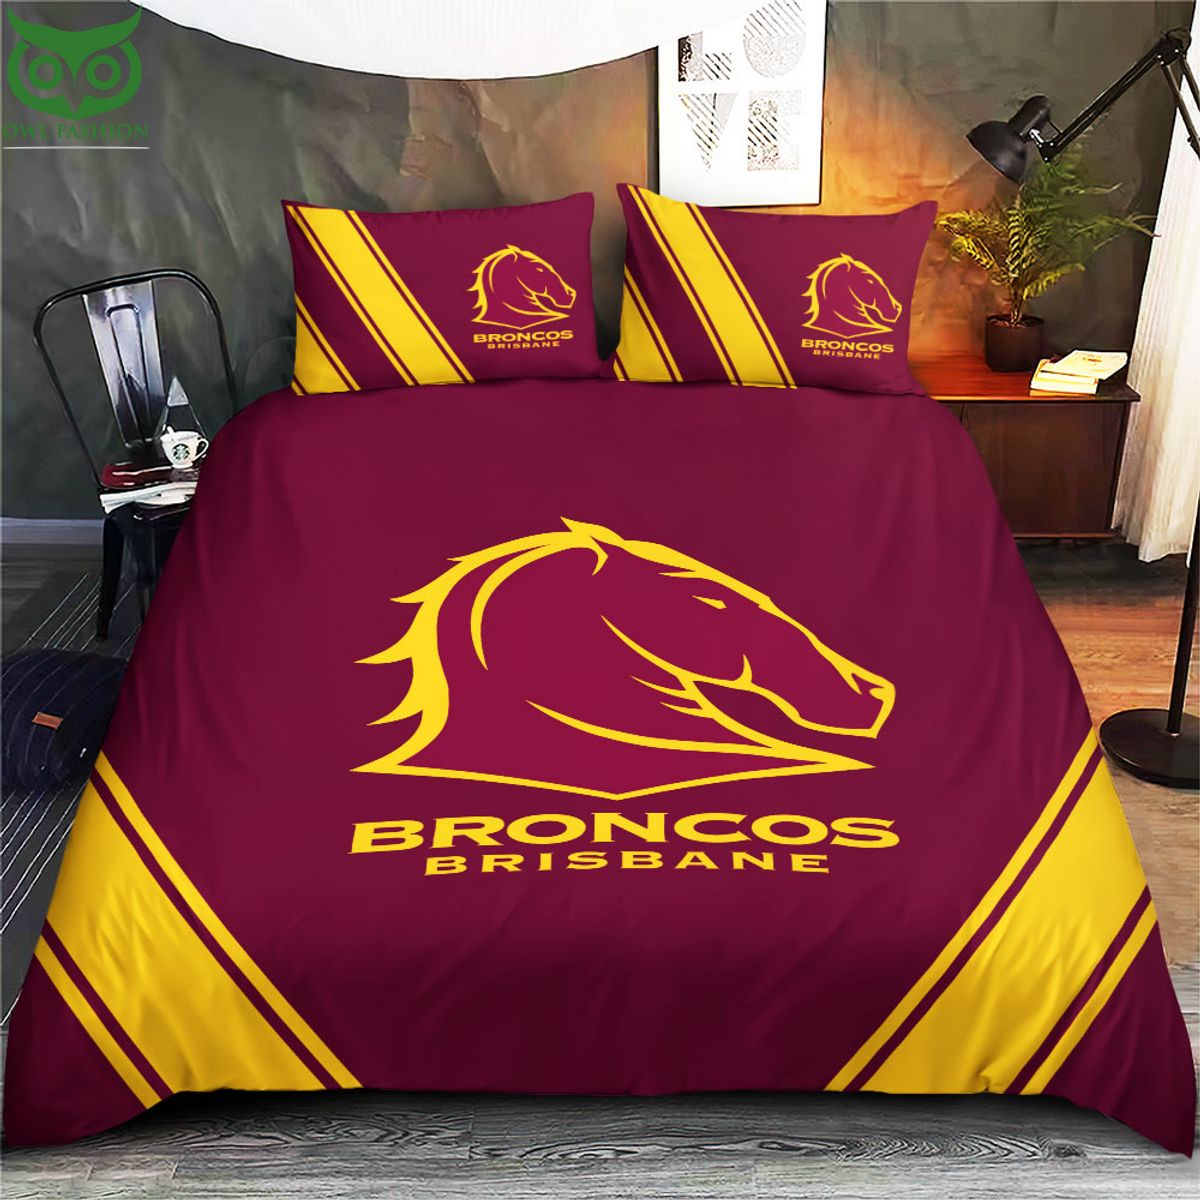 Brisbane Broncos Limited Bedding set You guys complement each other